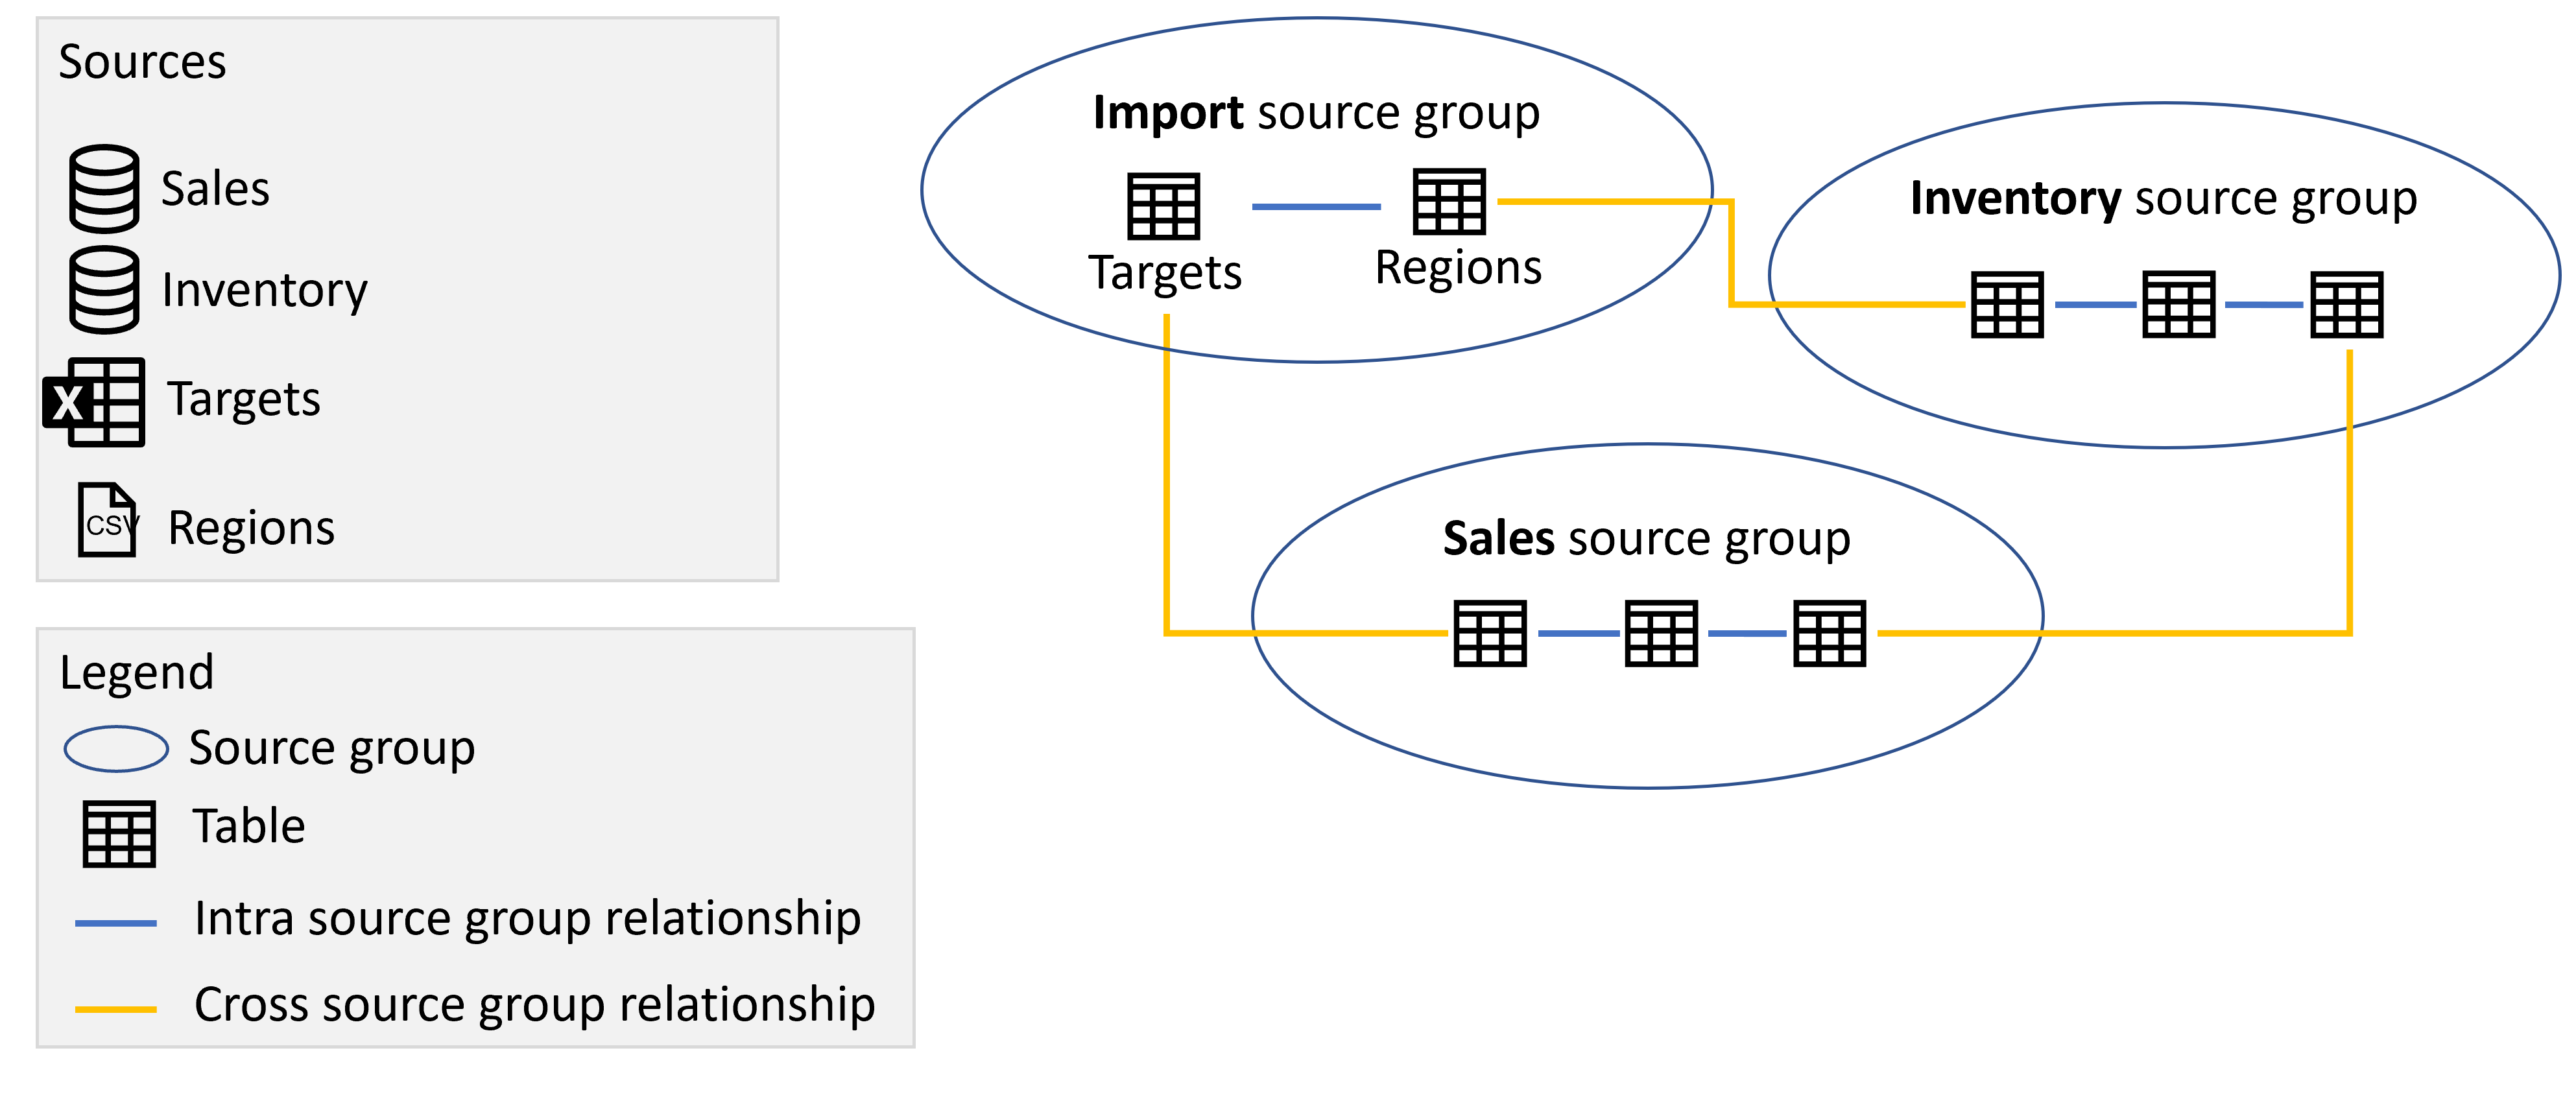 Diagram showing the Import, Sales, and Inventory source groups containing the tables from the respective sources and relationships between the source groups as described previously.